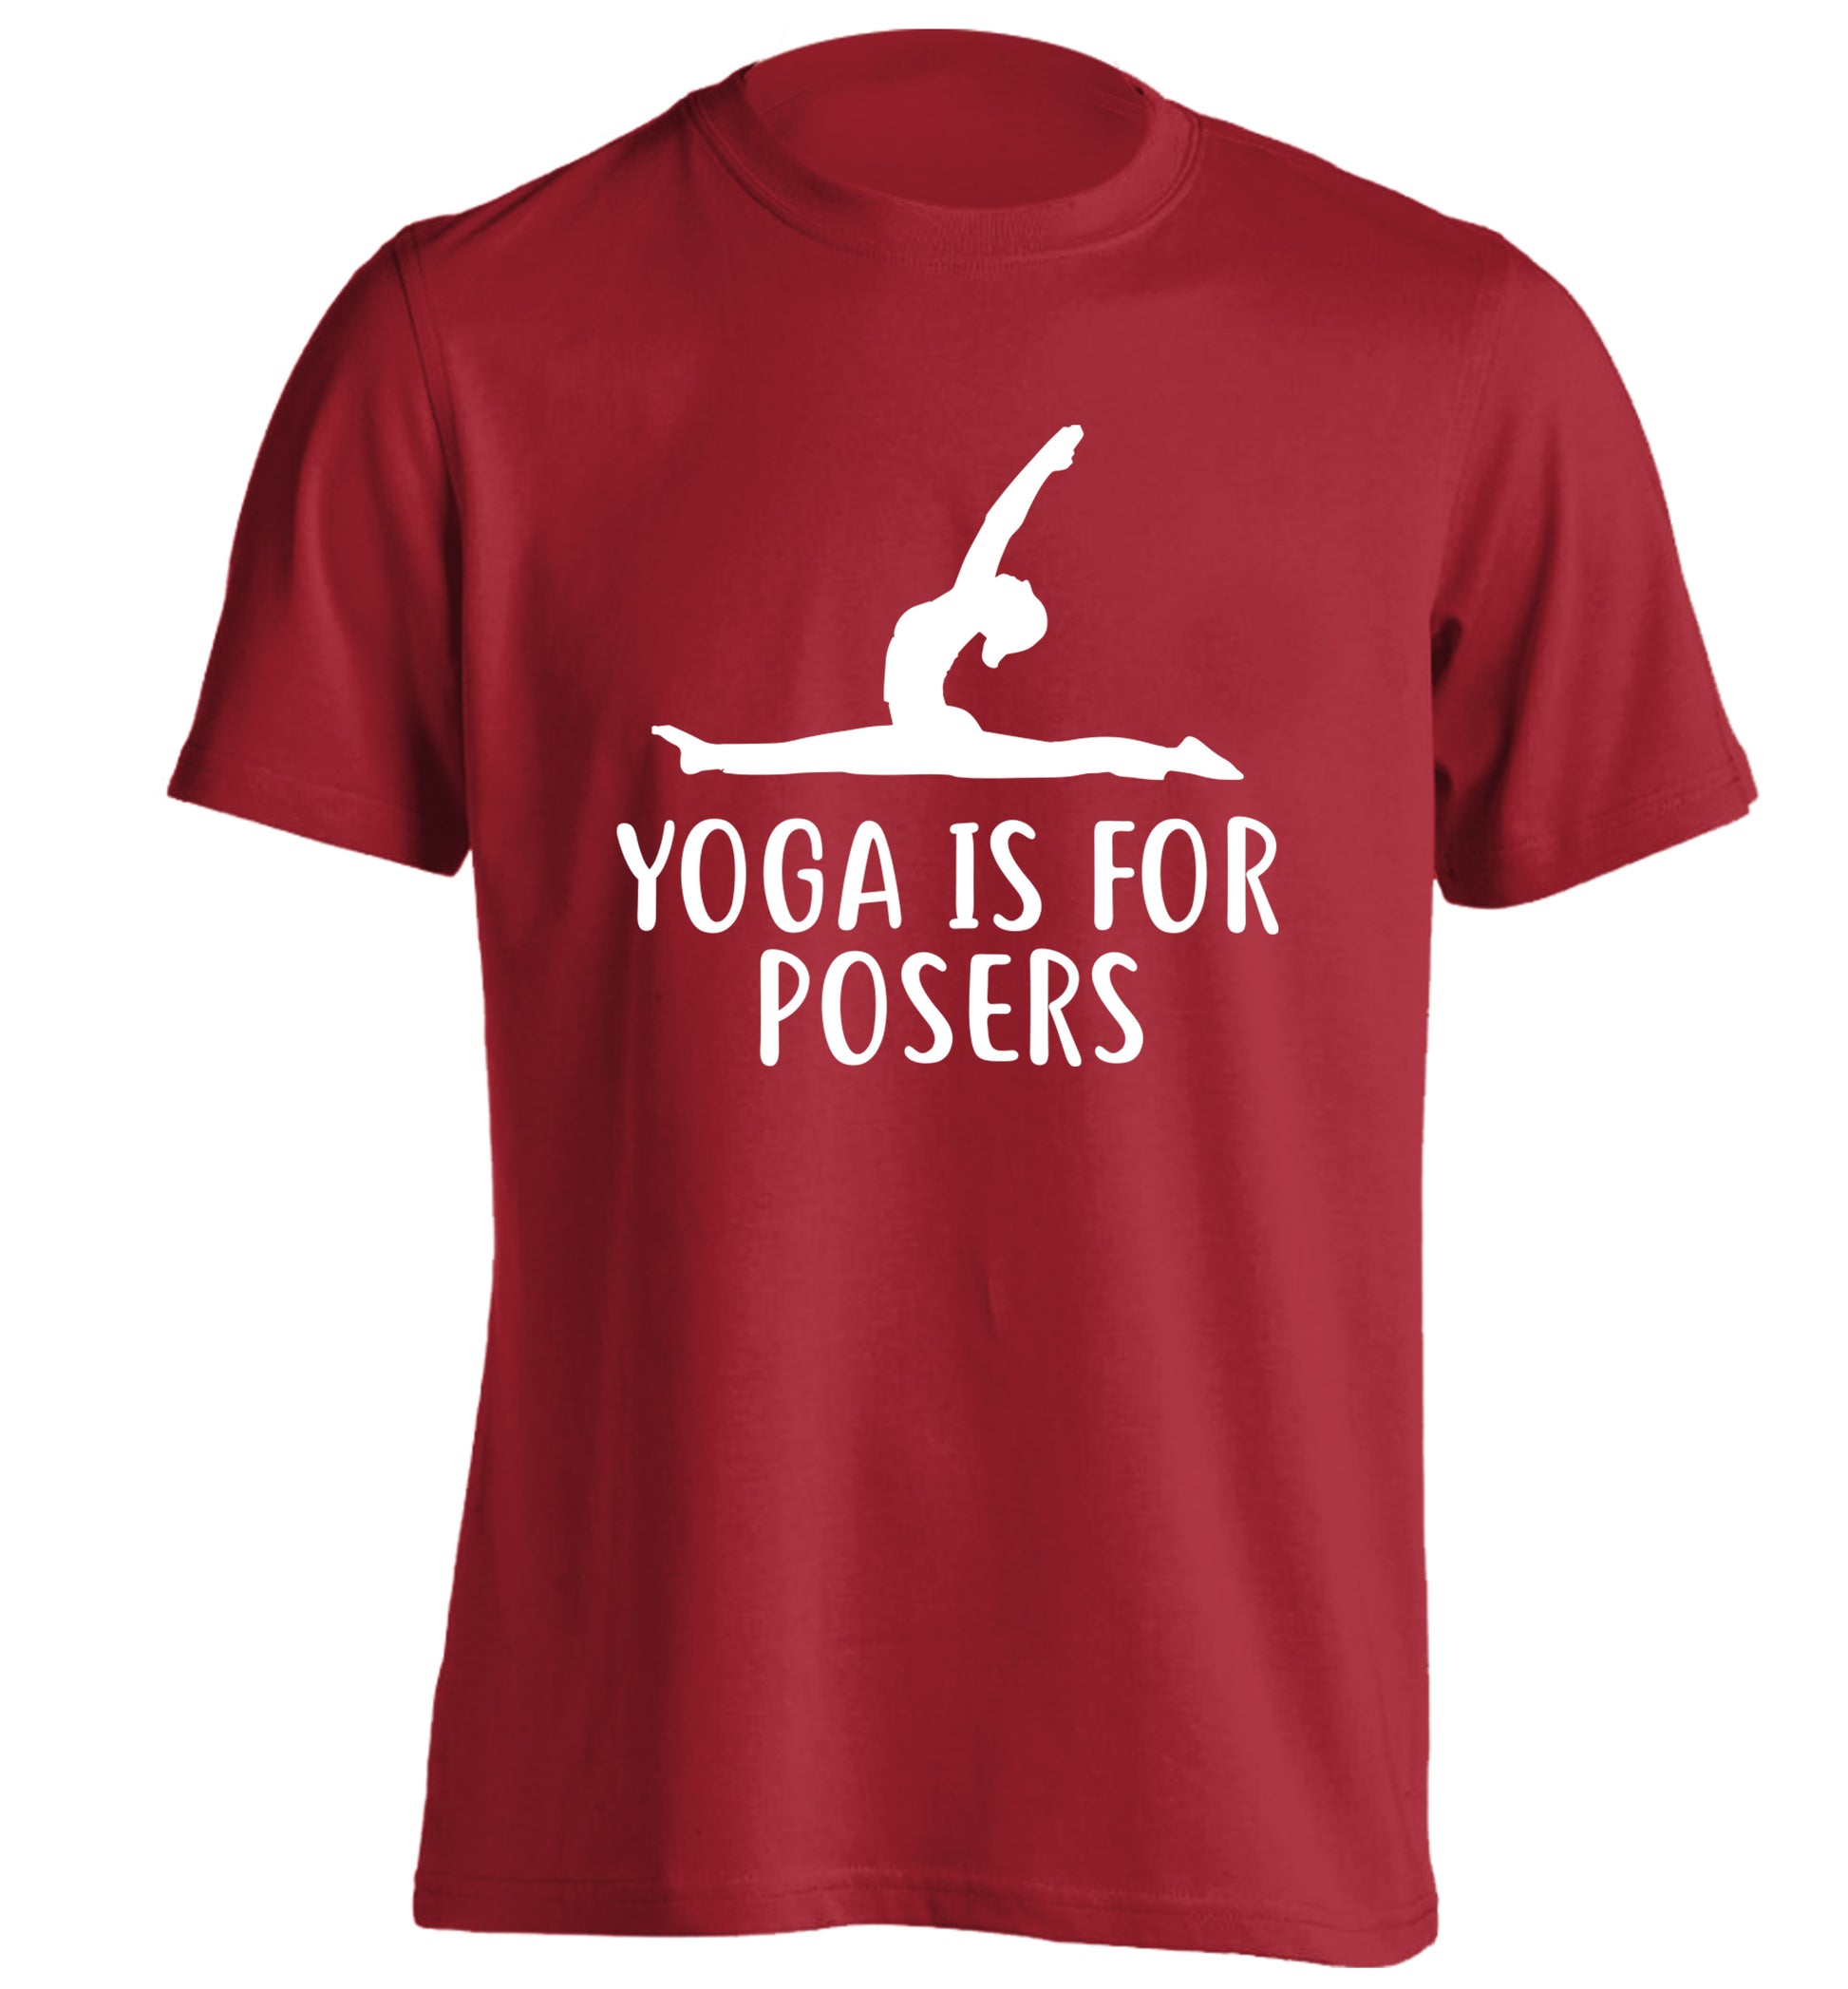 Yoga is for posers adults unisex red Tshirt 2XL